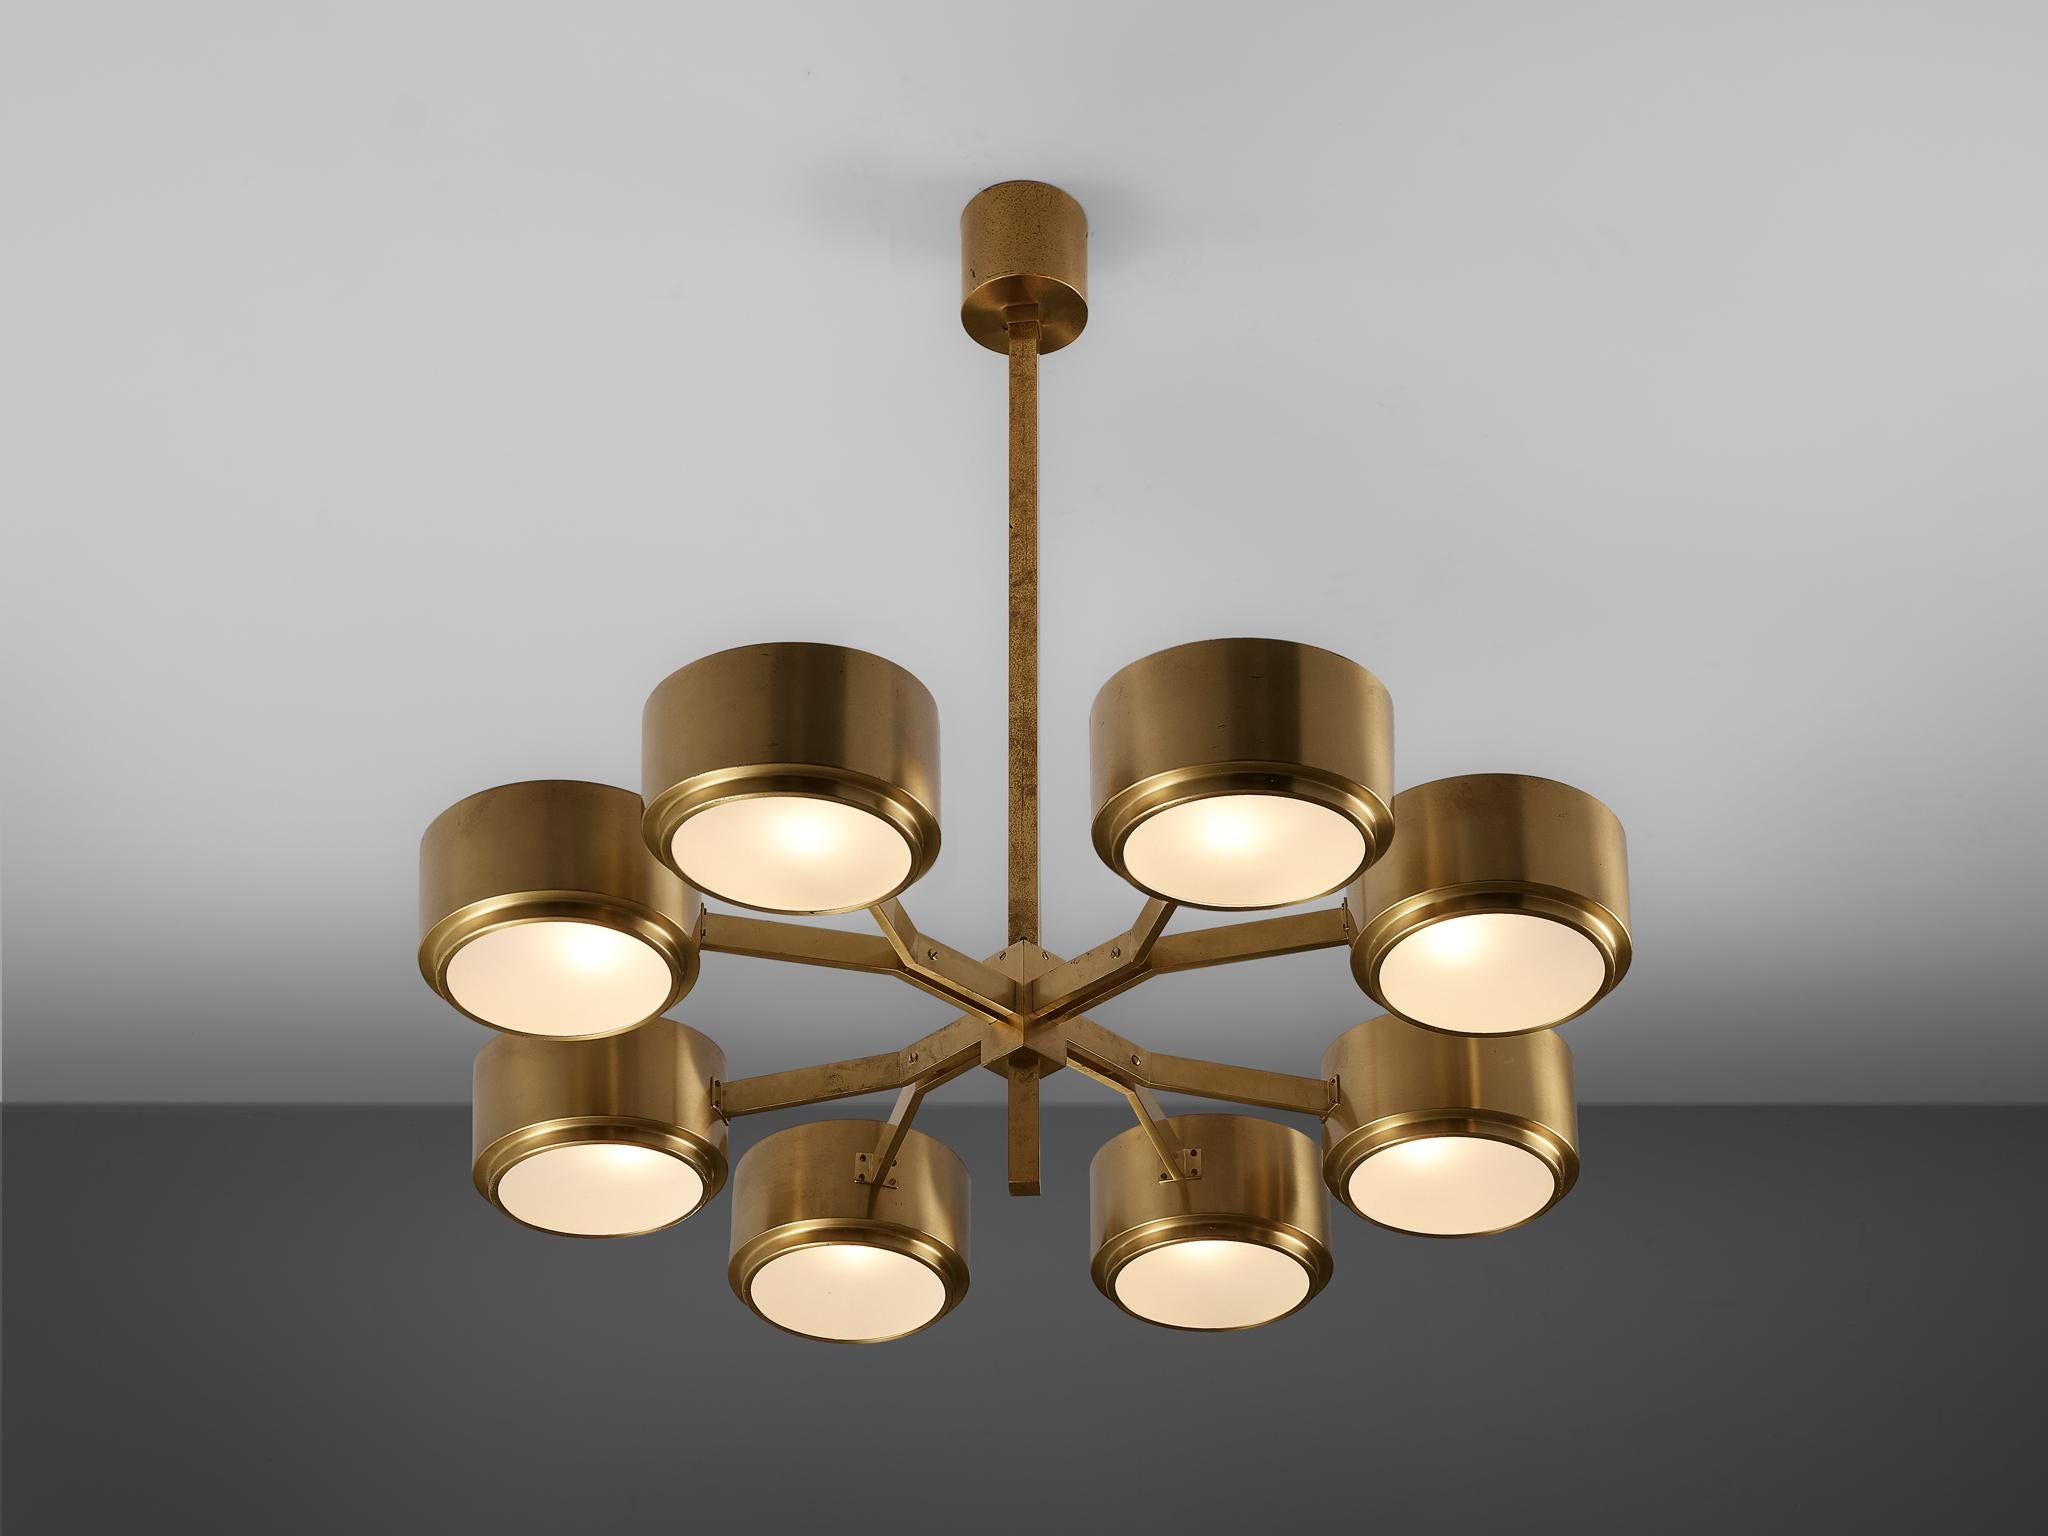 Hans-Agne Jakobsson for Markaryd, chandelier in brass, glass, Sweden, 1970s

Distinct Hans-Agne Jakobsson chandelier with eight cylindrical lights arranged in a circle. The gold coloured brass gives the design a luxurious look. 

Hans-Agne Jakobsson